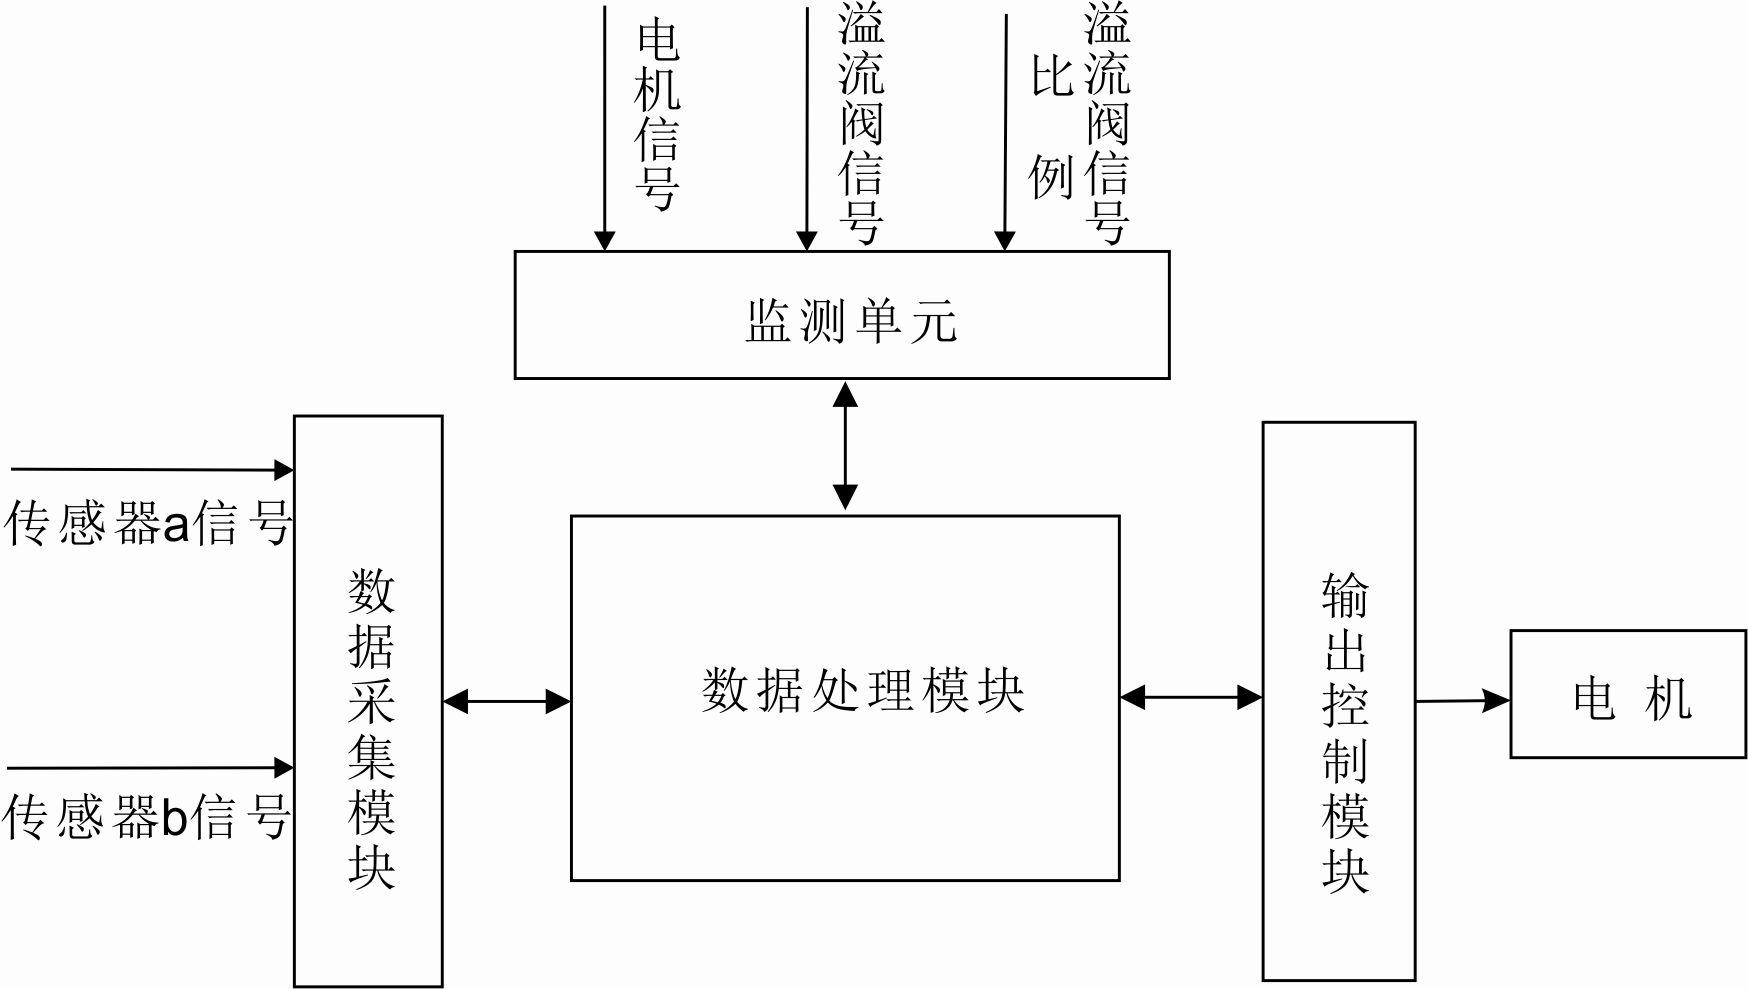 Energy-saving control system of injection molding machine and operating mode of energy-saving control system